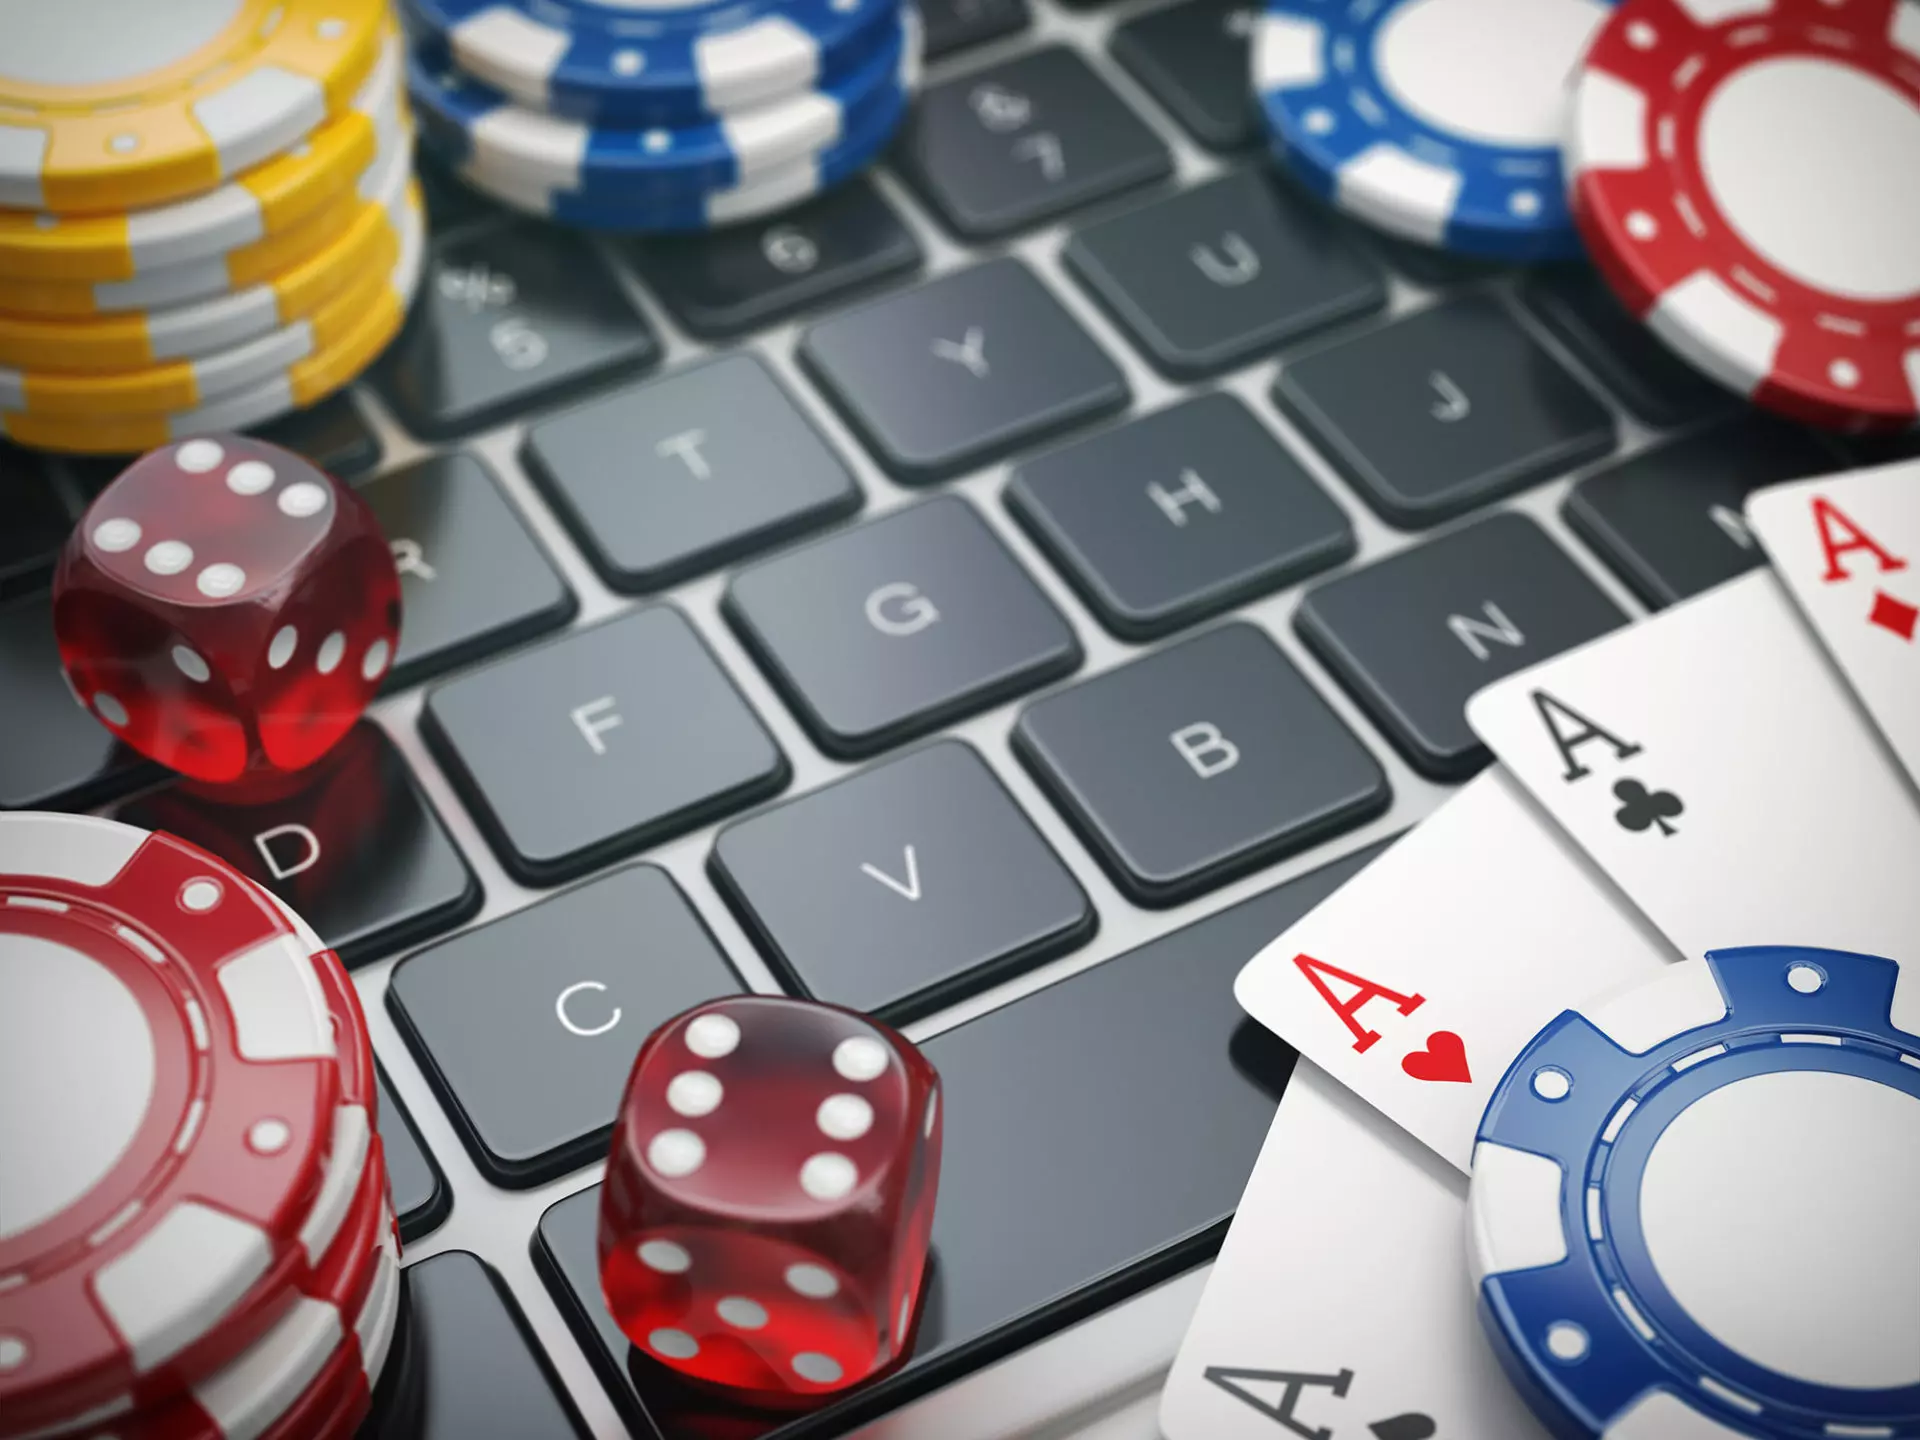 A picture on casino coins and dice on top of a laptop keyboard